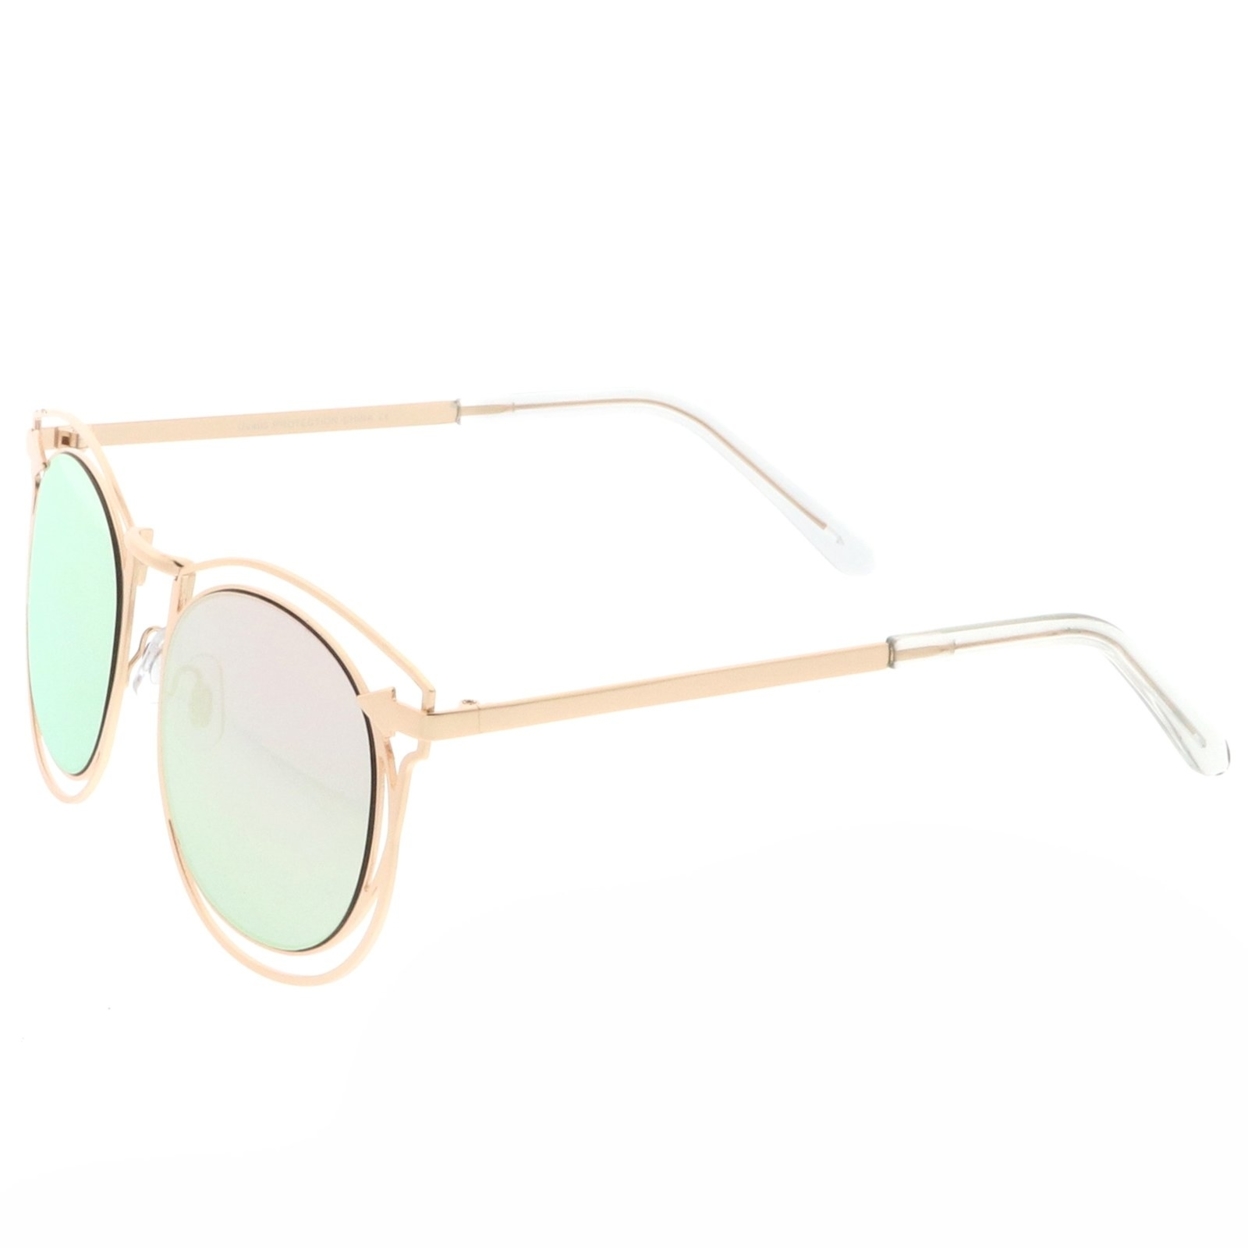 Oversize Open Metal Horn Rimmed Sunglasses With Arrow Design And Round Mirror Flat Lens 55mm - Gold / Silver Mirror